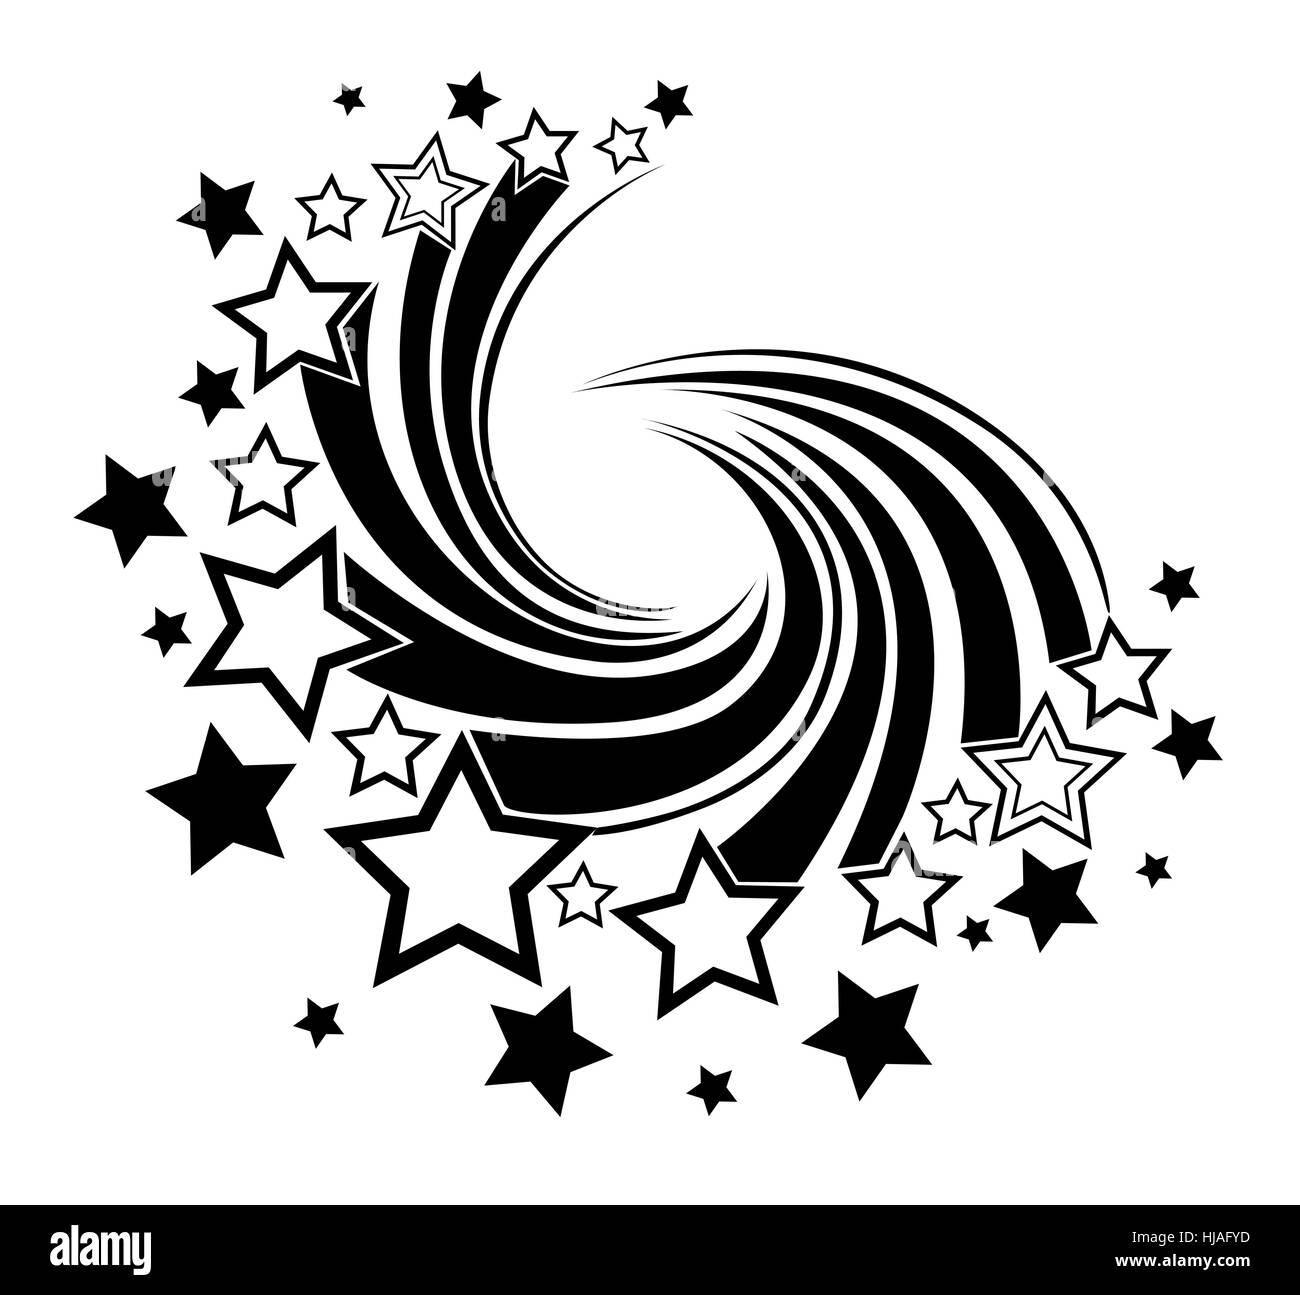 vortex of black, outline comets on a white background. Stock Vector